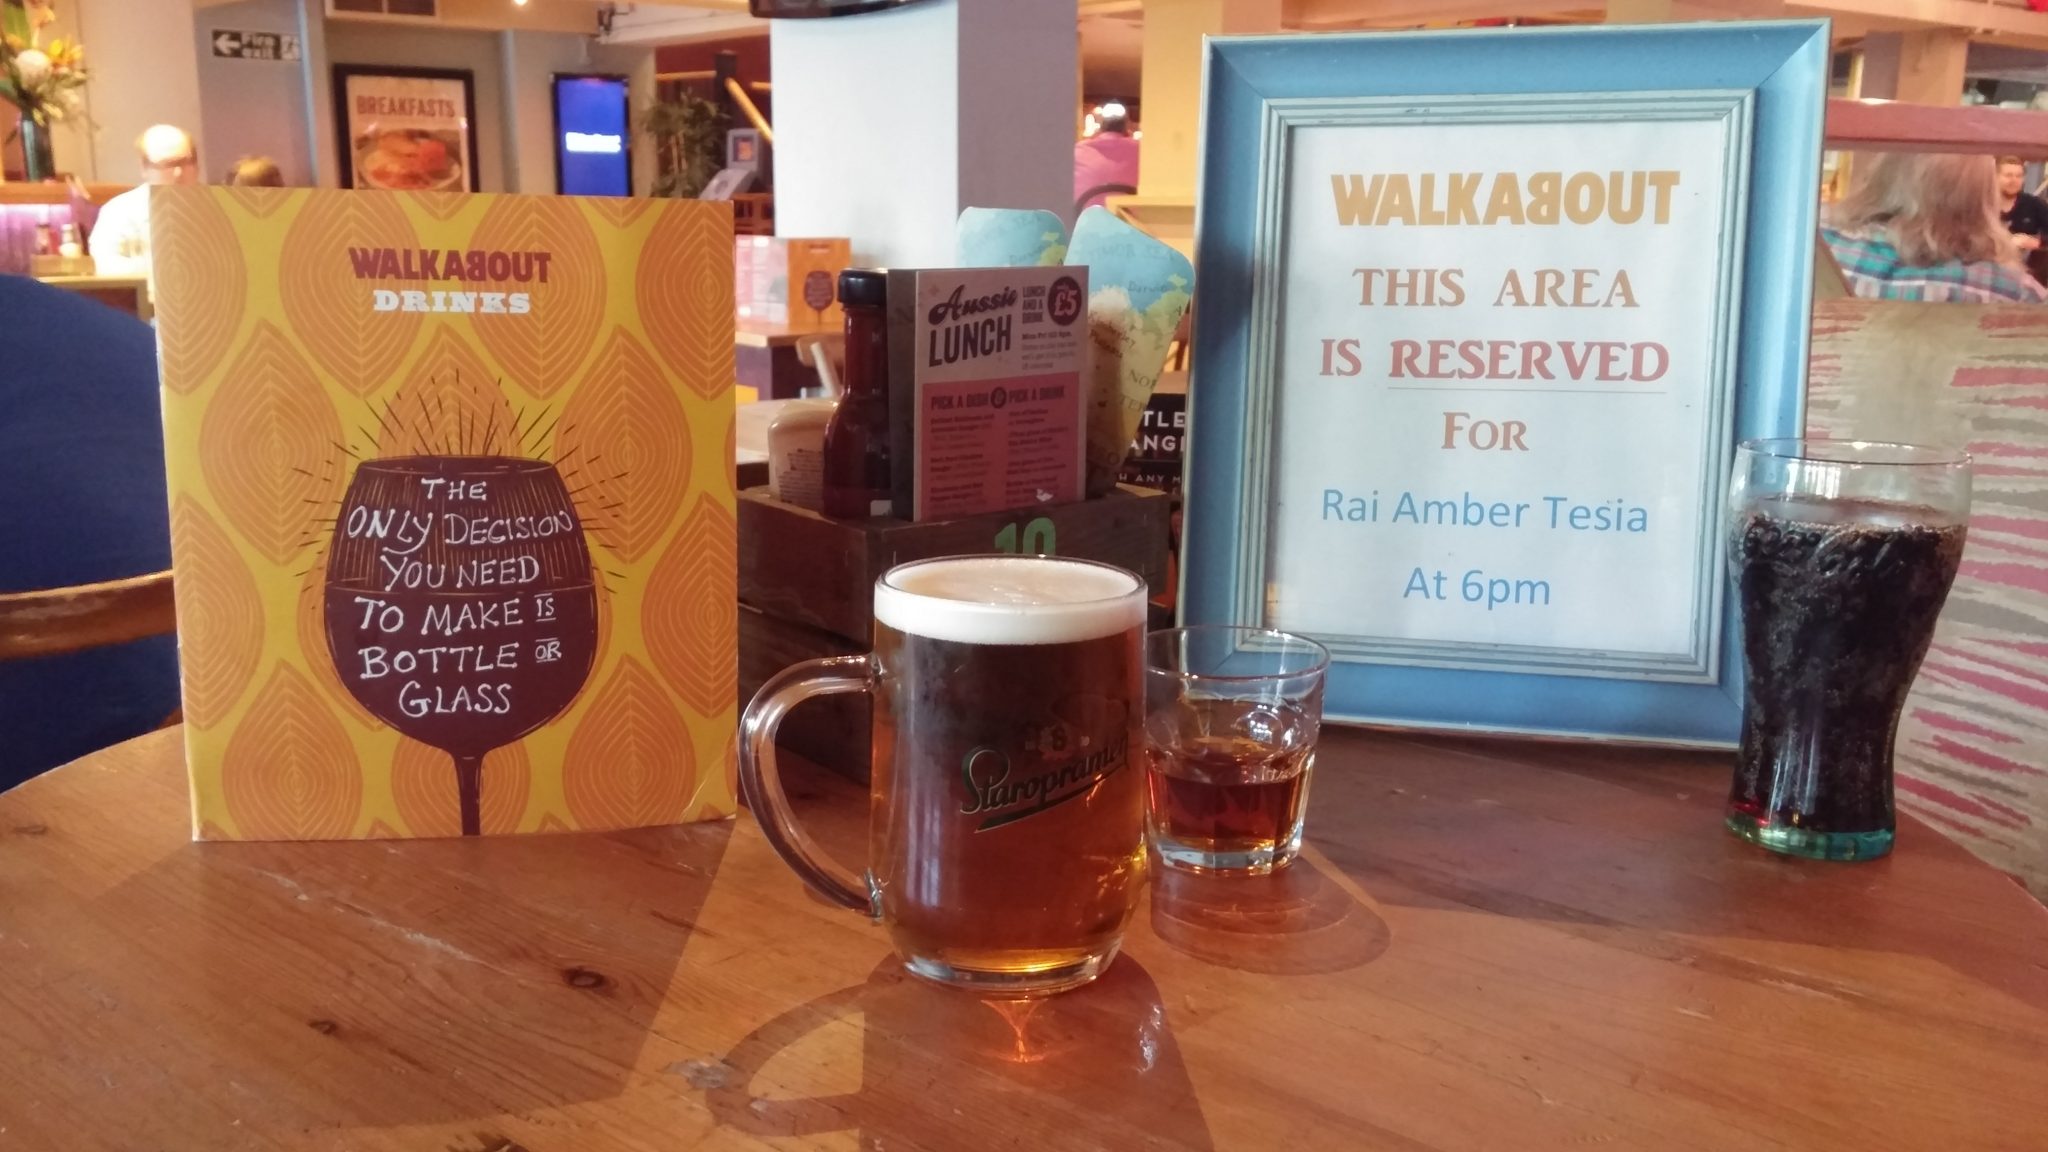 Restaurant Review: Walkabout, Derby